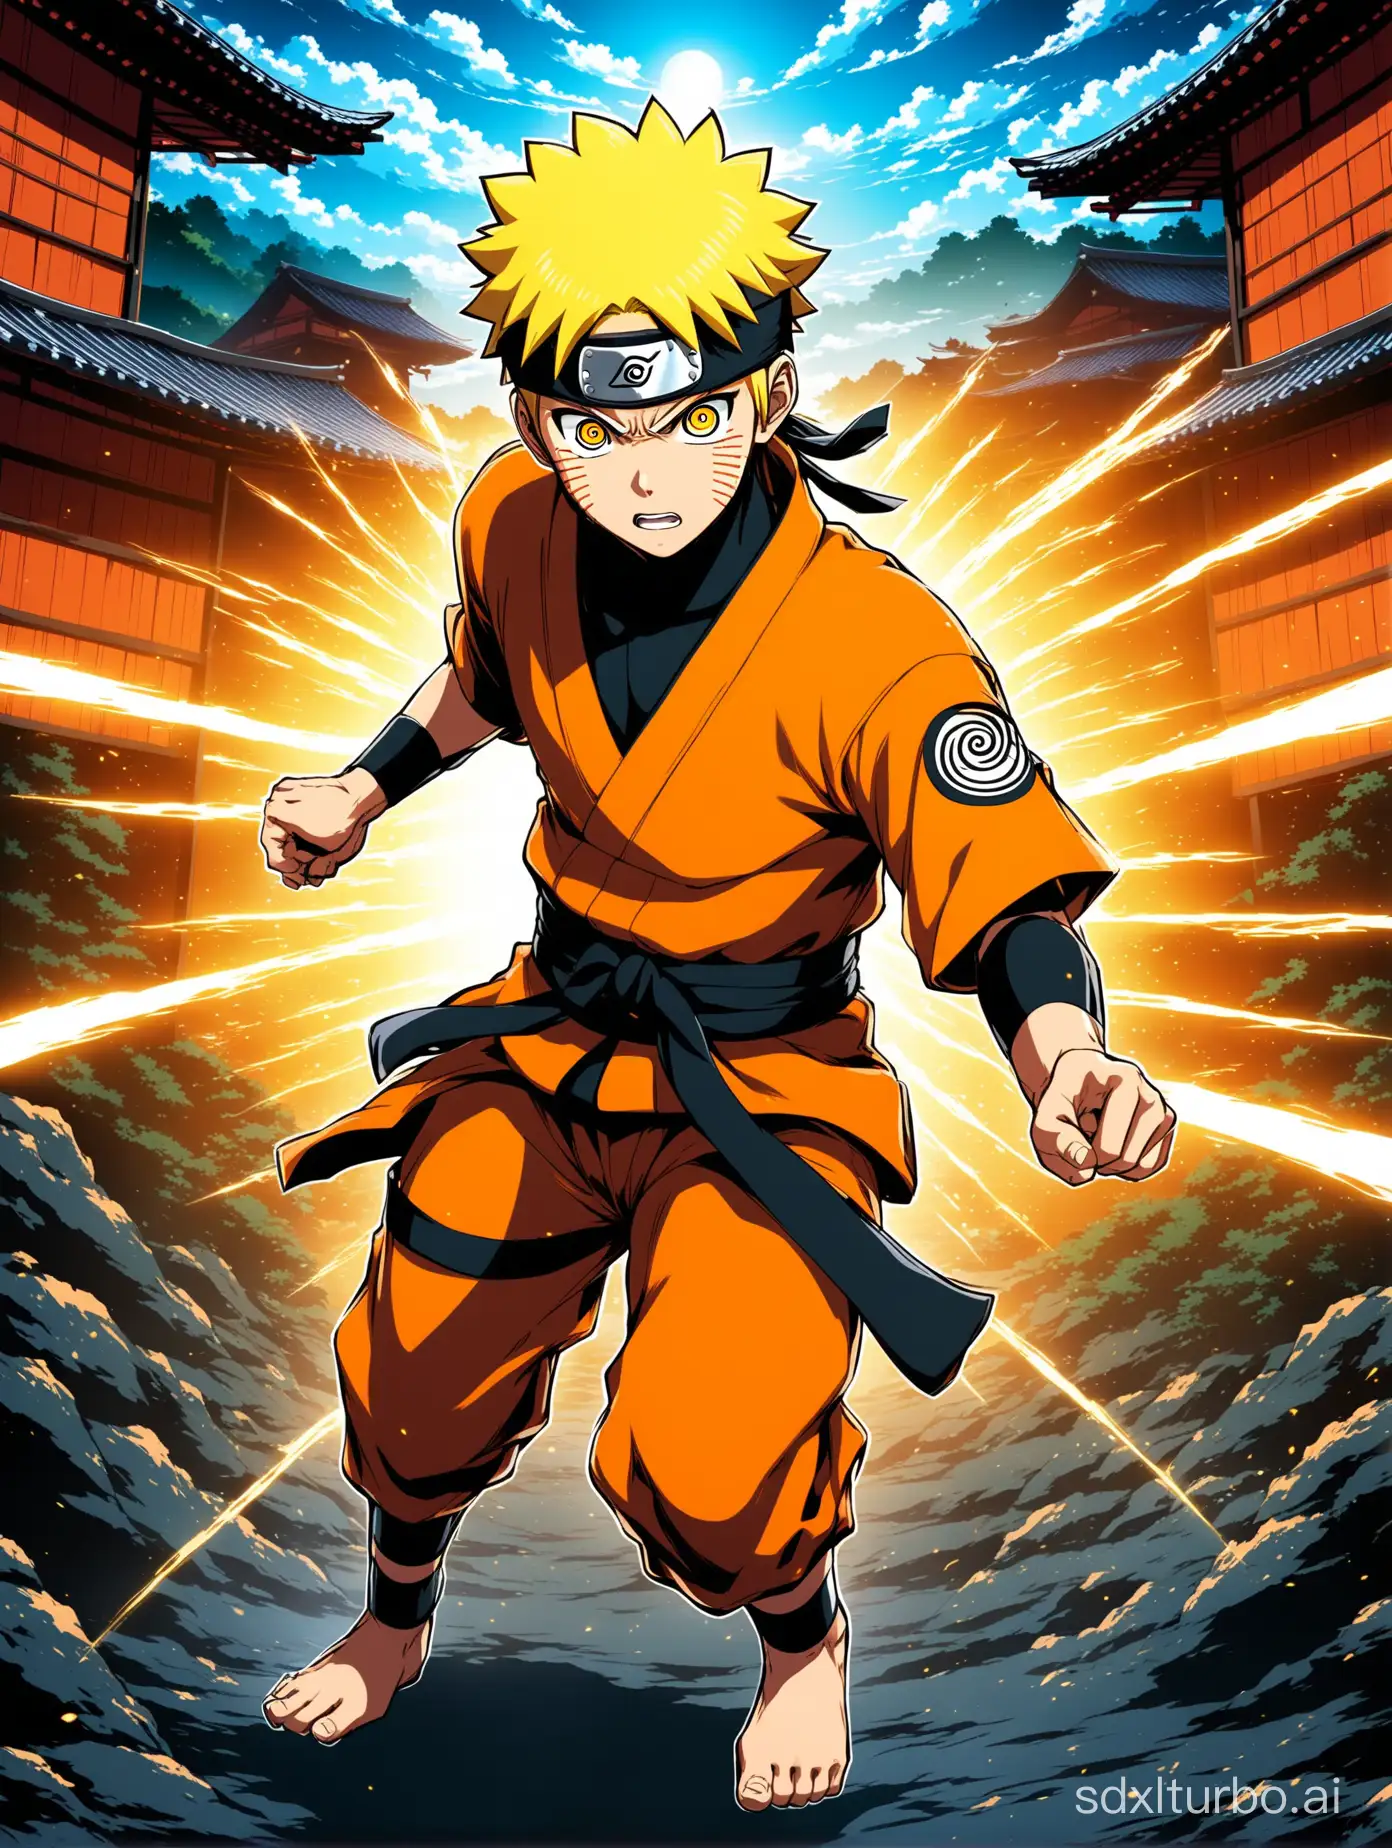 Naruto Uzumaki, young ninja with orange clothing and yellow bodysuit, blue forehead protector, ninja village or combat scene background, anime style with vitality and spirit of adventure, digital art or animation, dynamic combat lighting for vitality and determination, high contrast colors, ninja emblems on the costume, expressive facial features. 